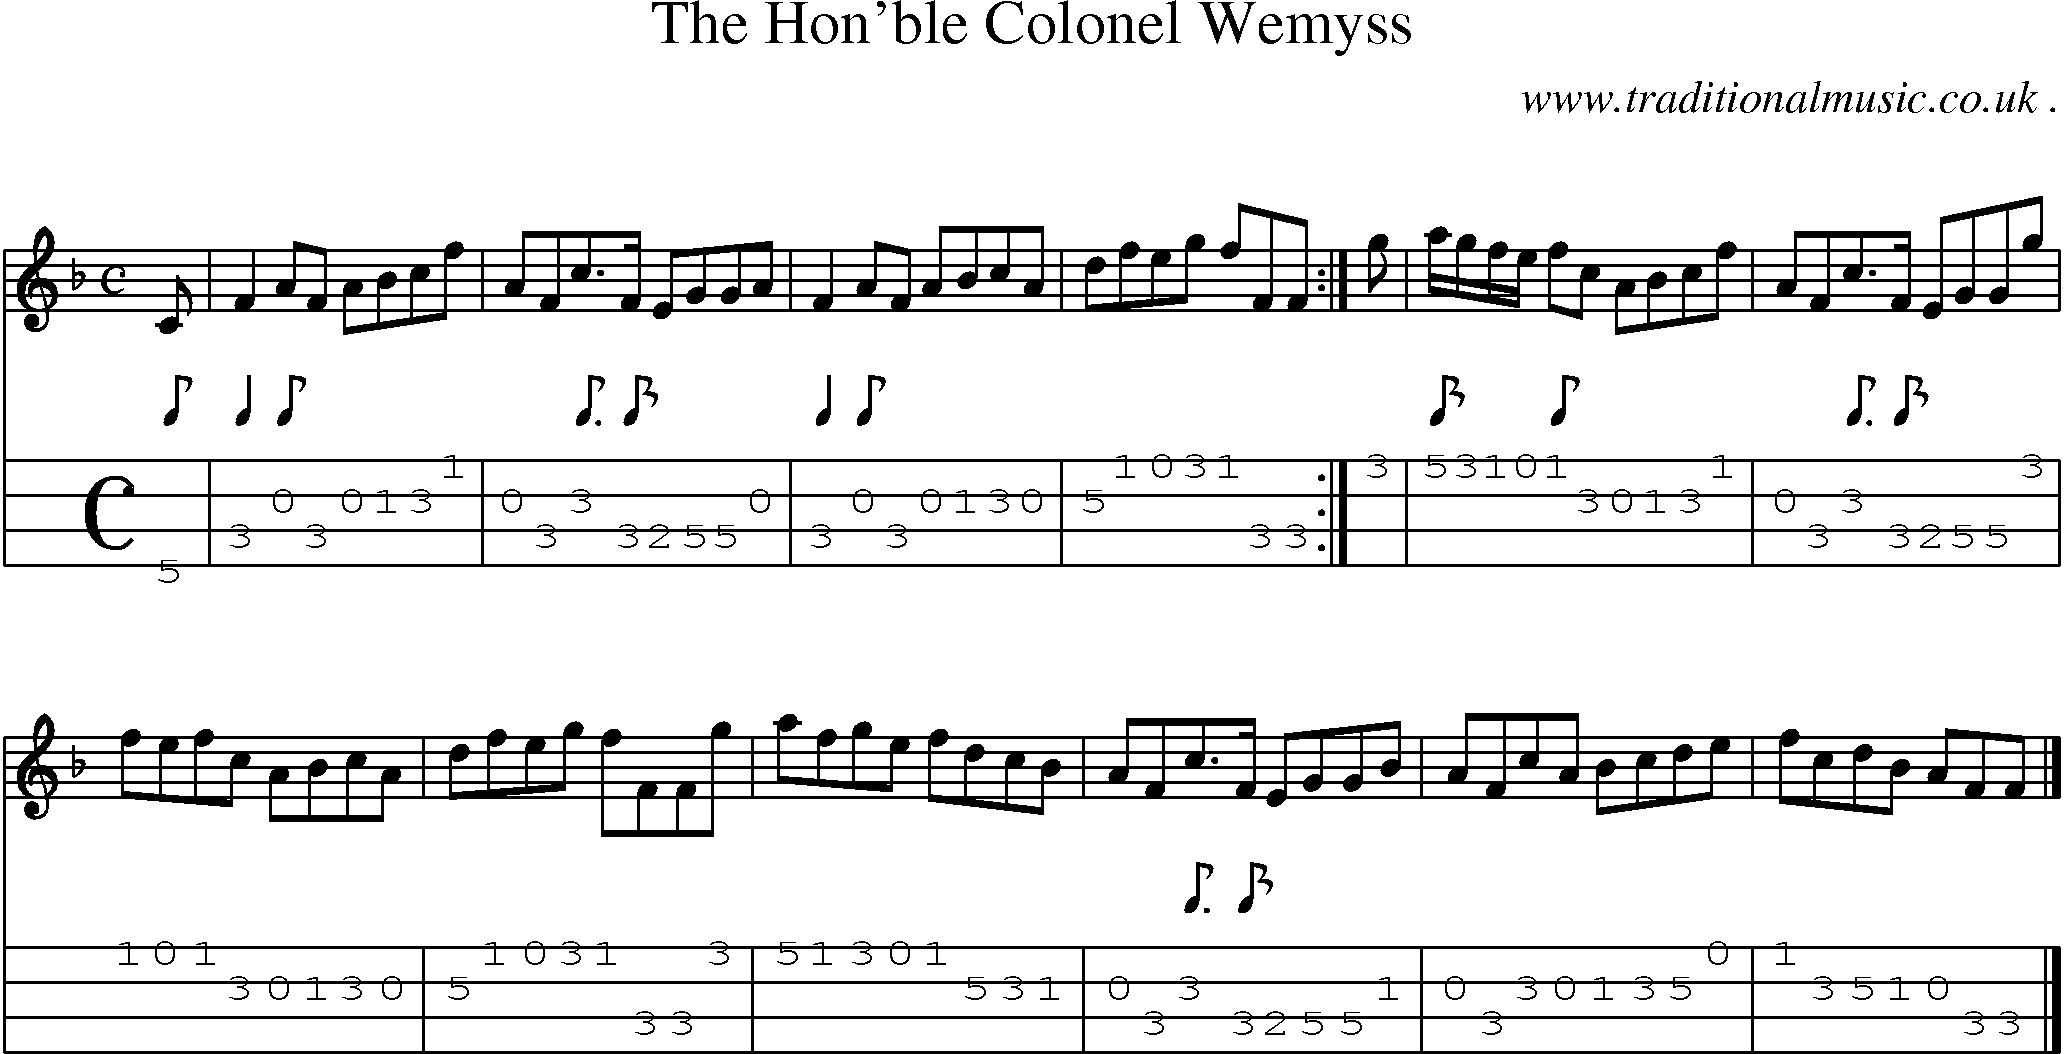 Sheet-music  score, Chords and Mandolin Tabs for The Honble Colonel Wemyss